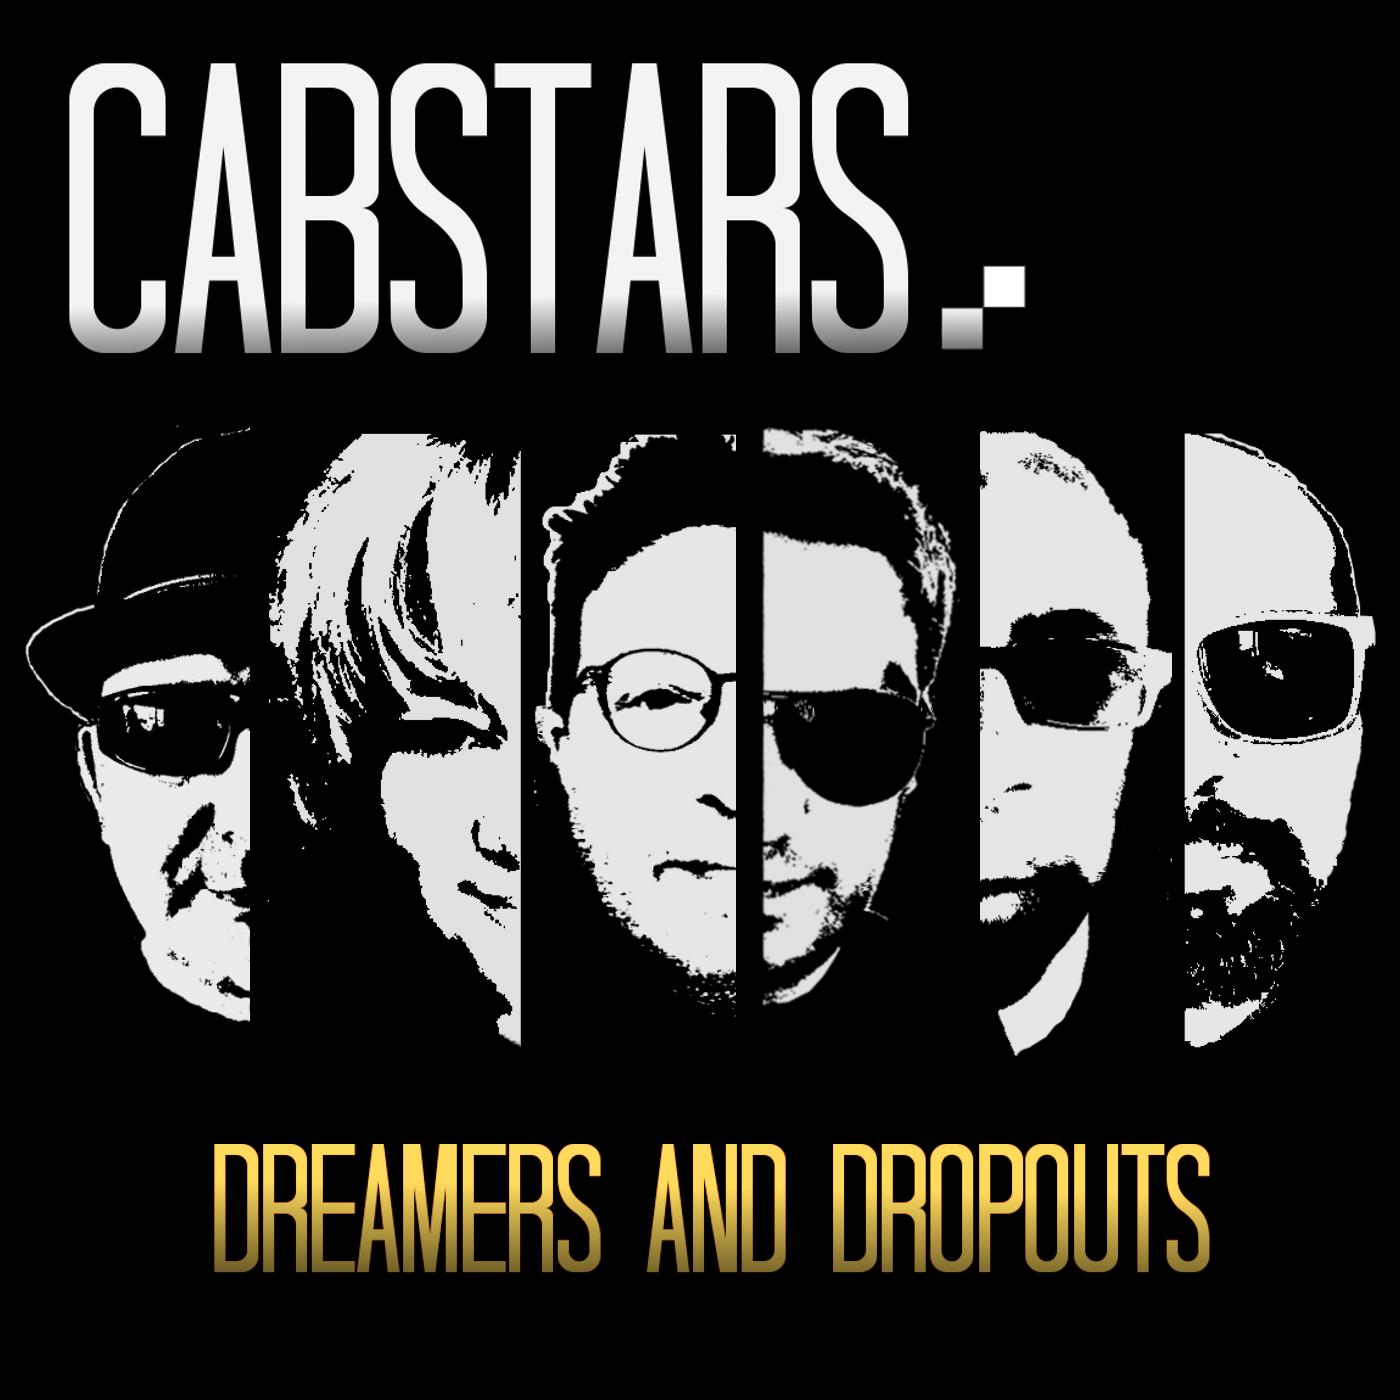 Dreamers and Dropouts